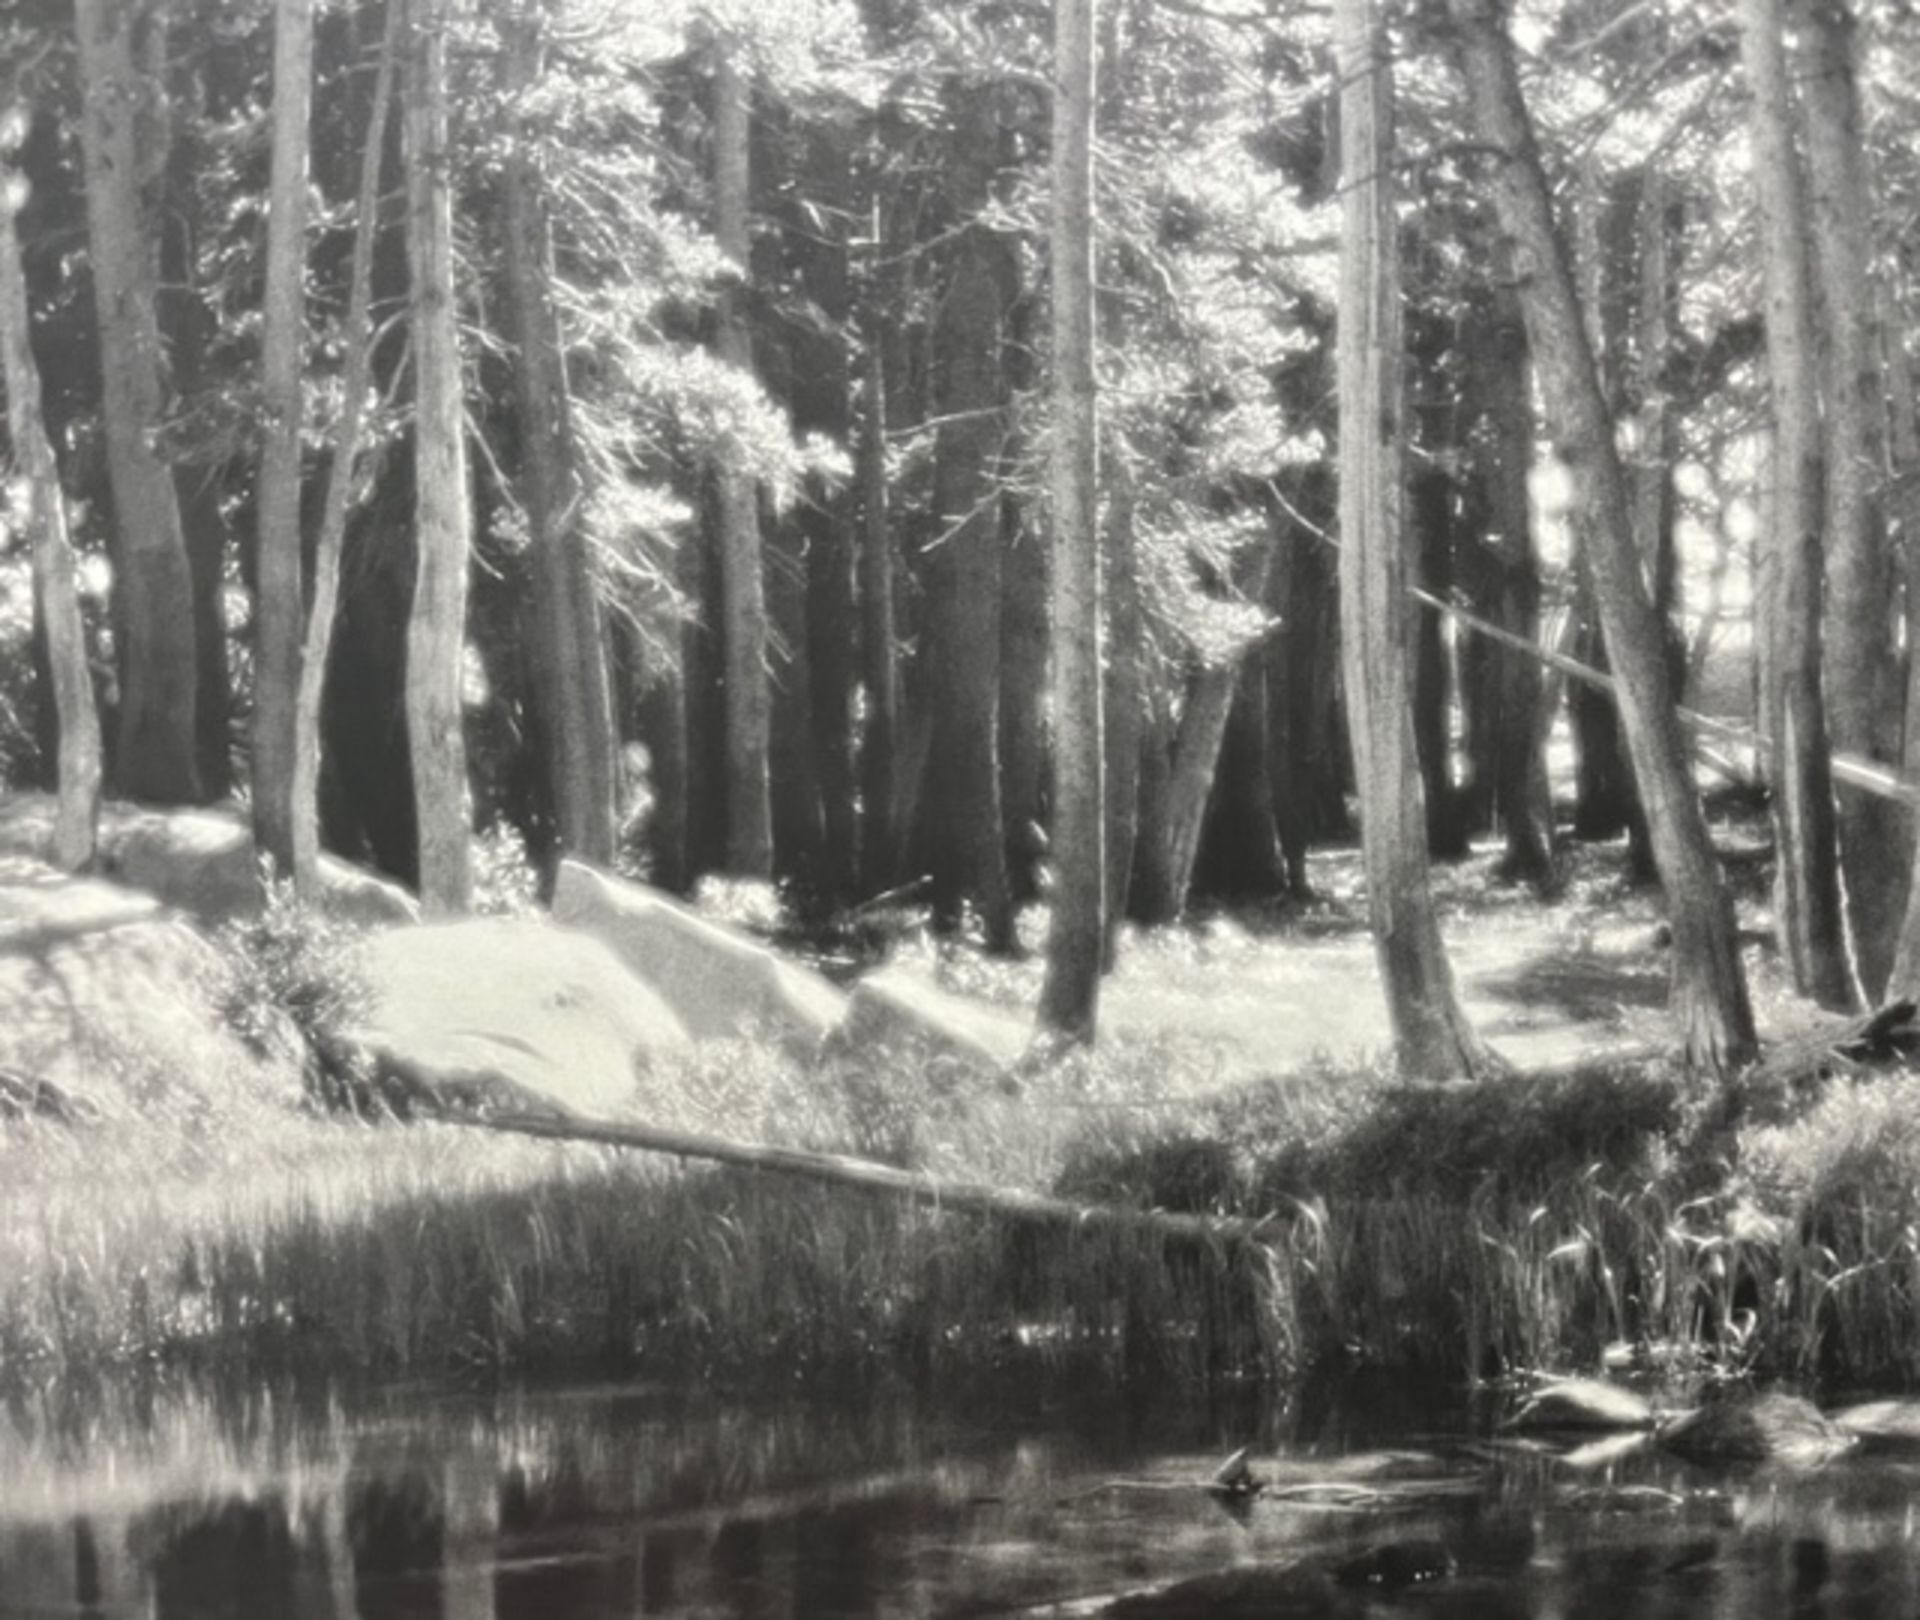 Ansel Adams "Forest and Stream " Print.